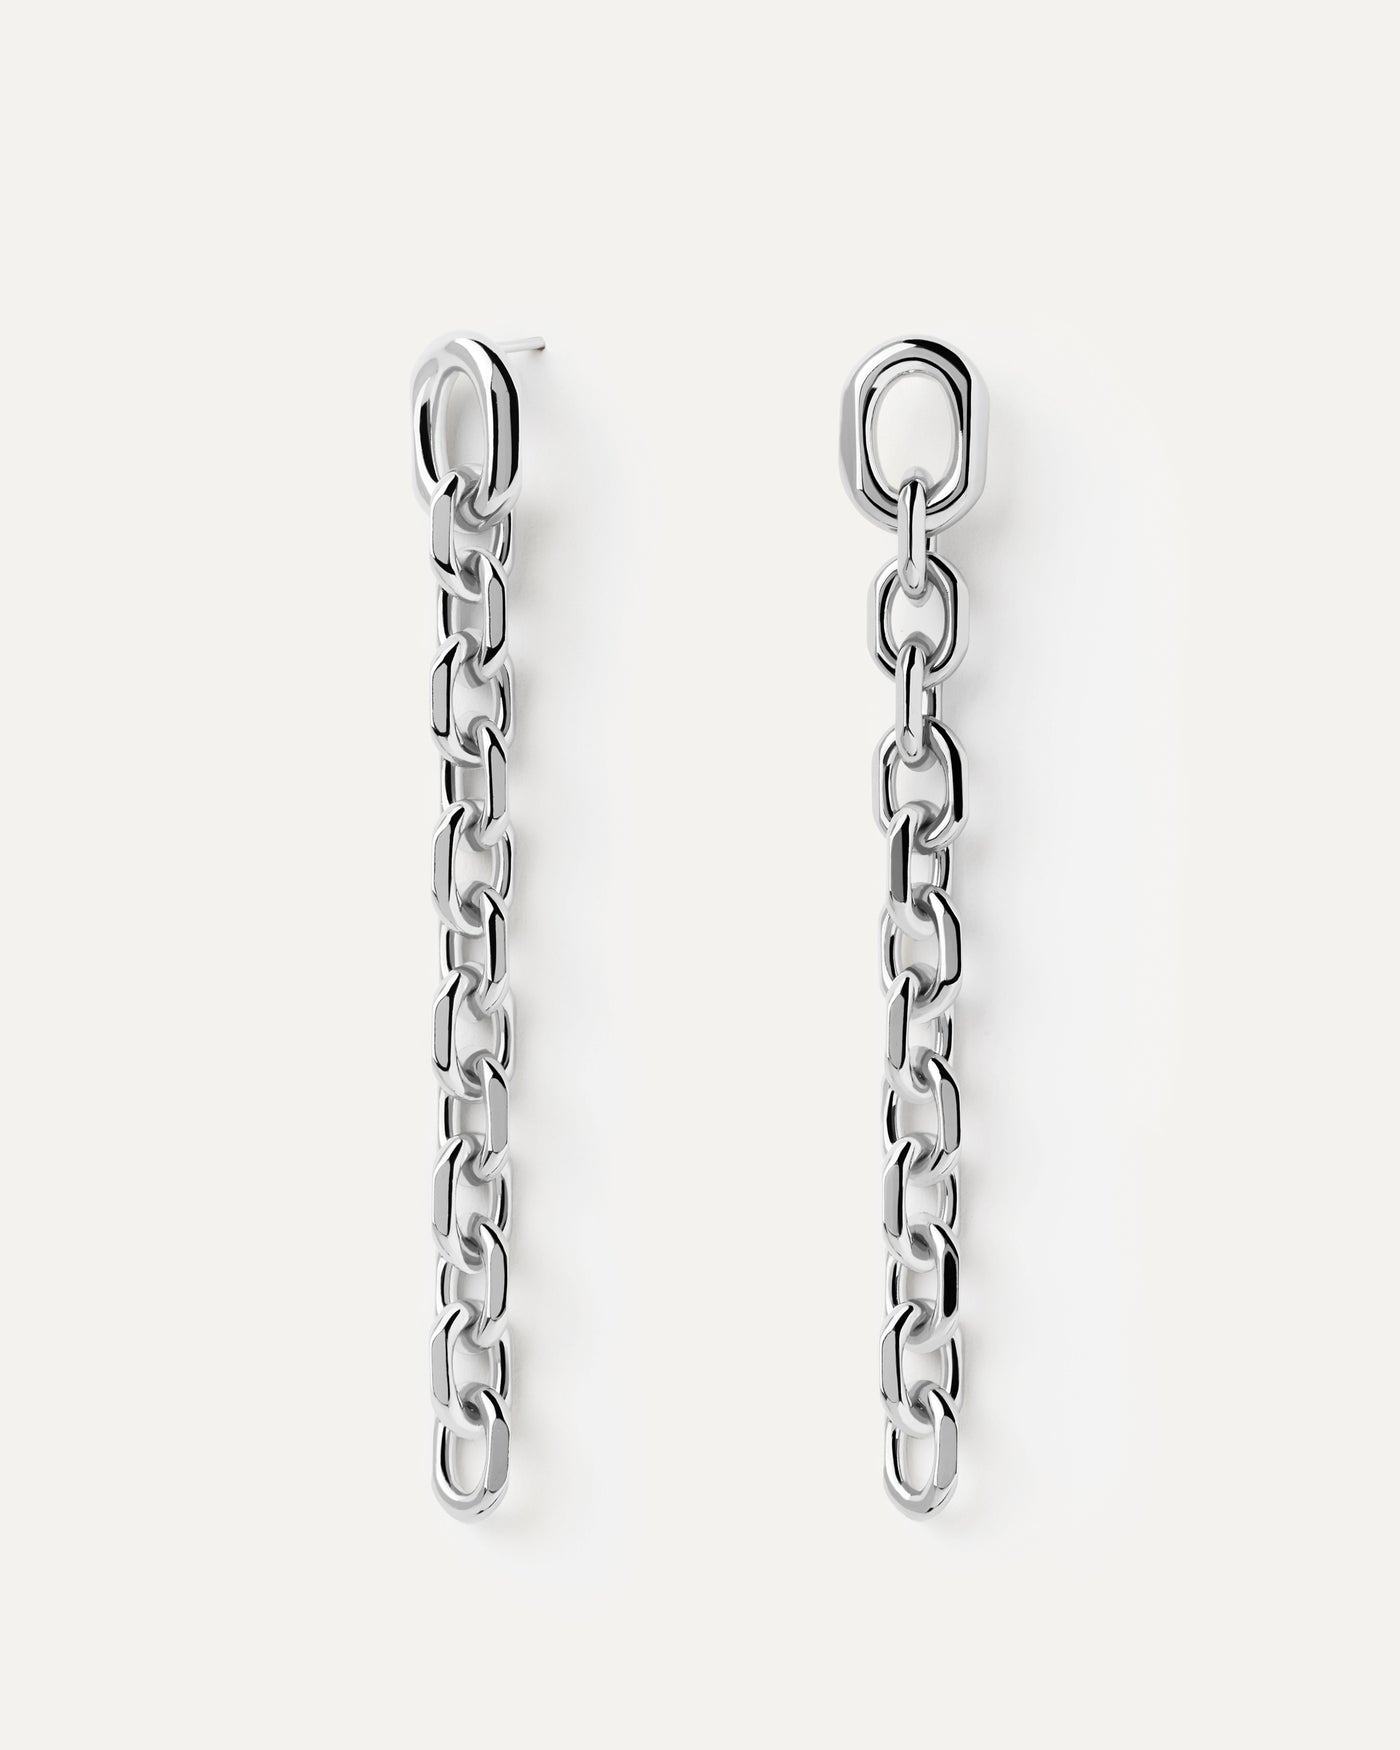 2023 Selection | Vesta Silver Earrings. Cable chain silver drop earrings with oval links. Get the latest arrival from PDPAOLA. Place your order safely and get this Best Seller. Free Shipping.